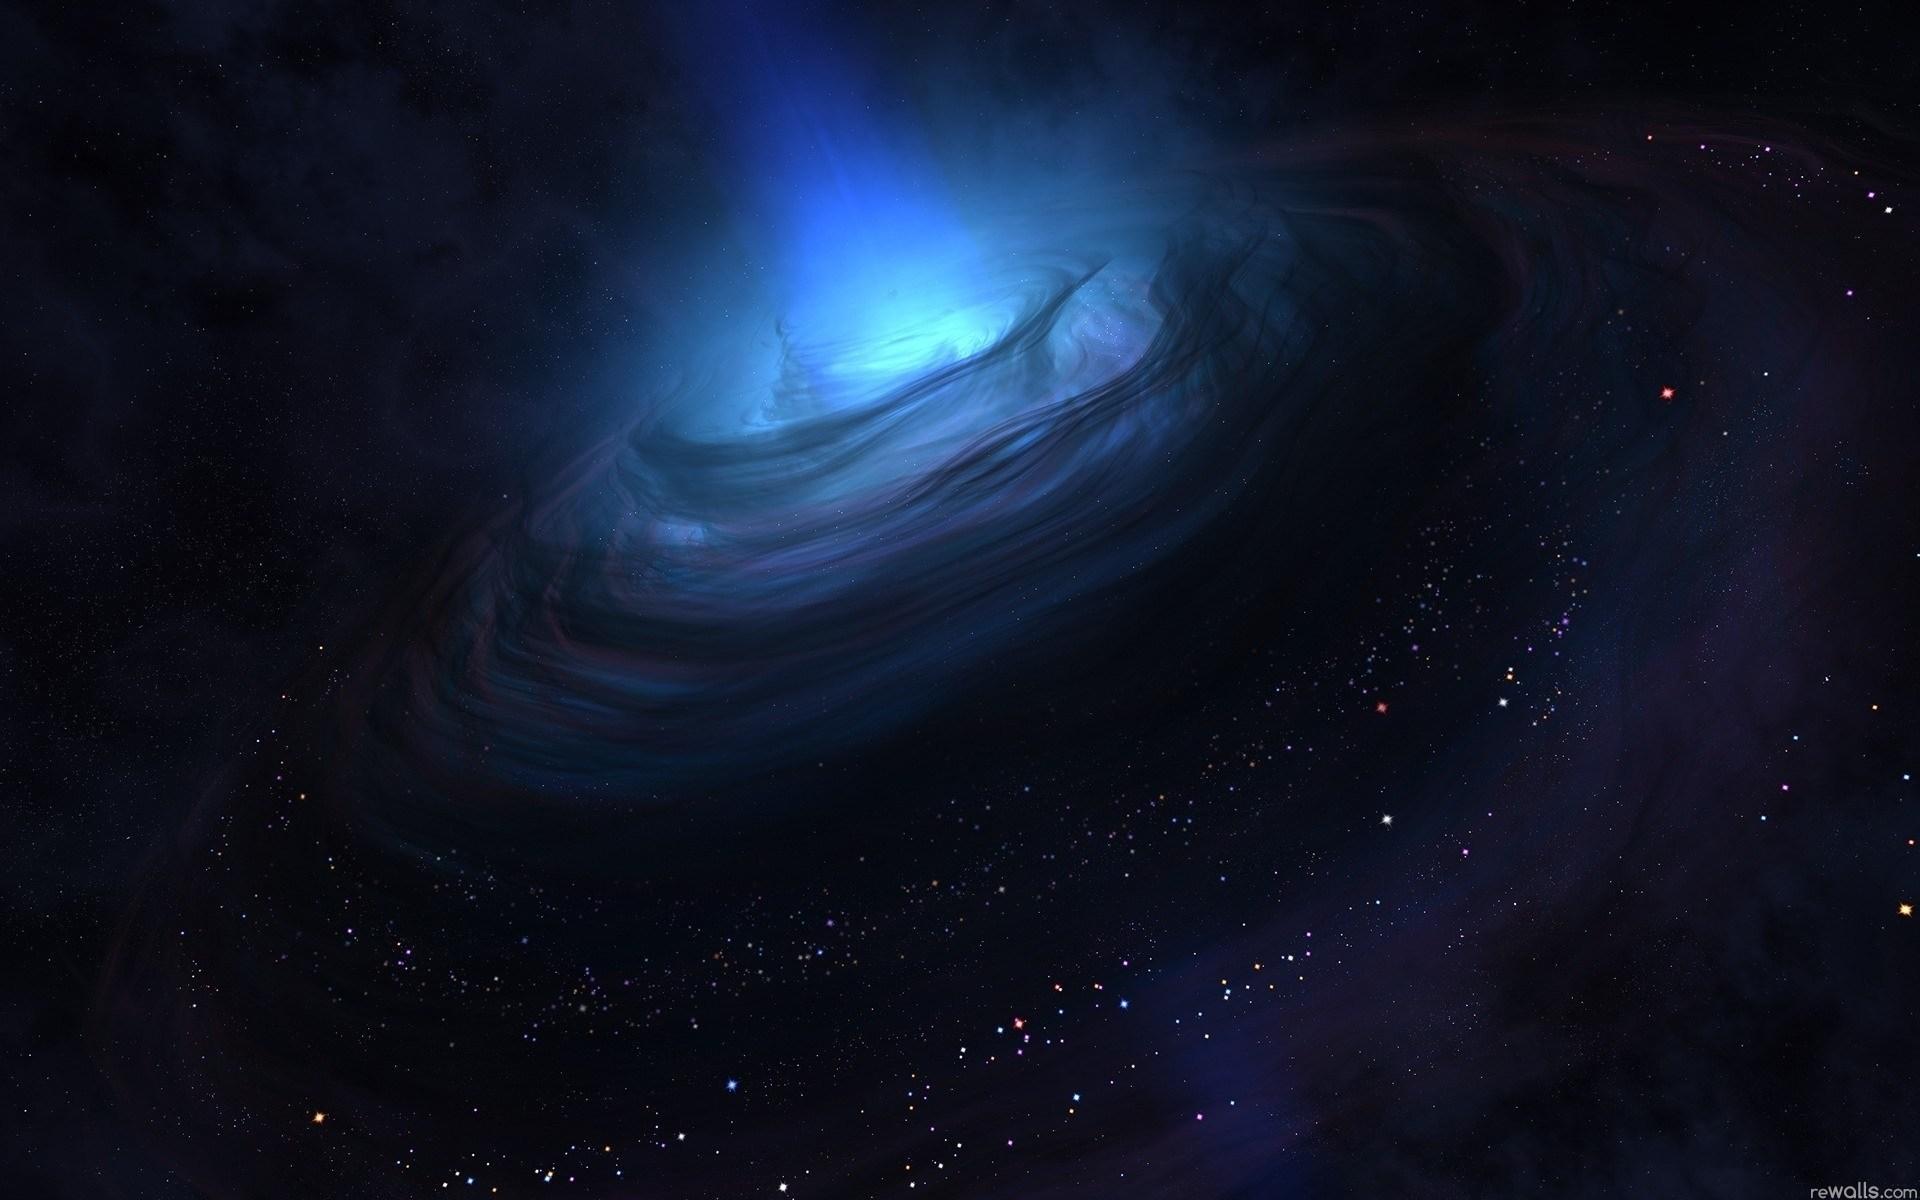 Elegant 5 Cool Black Hole Wallpaper With Resolution 1920 x 1920